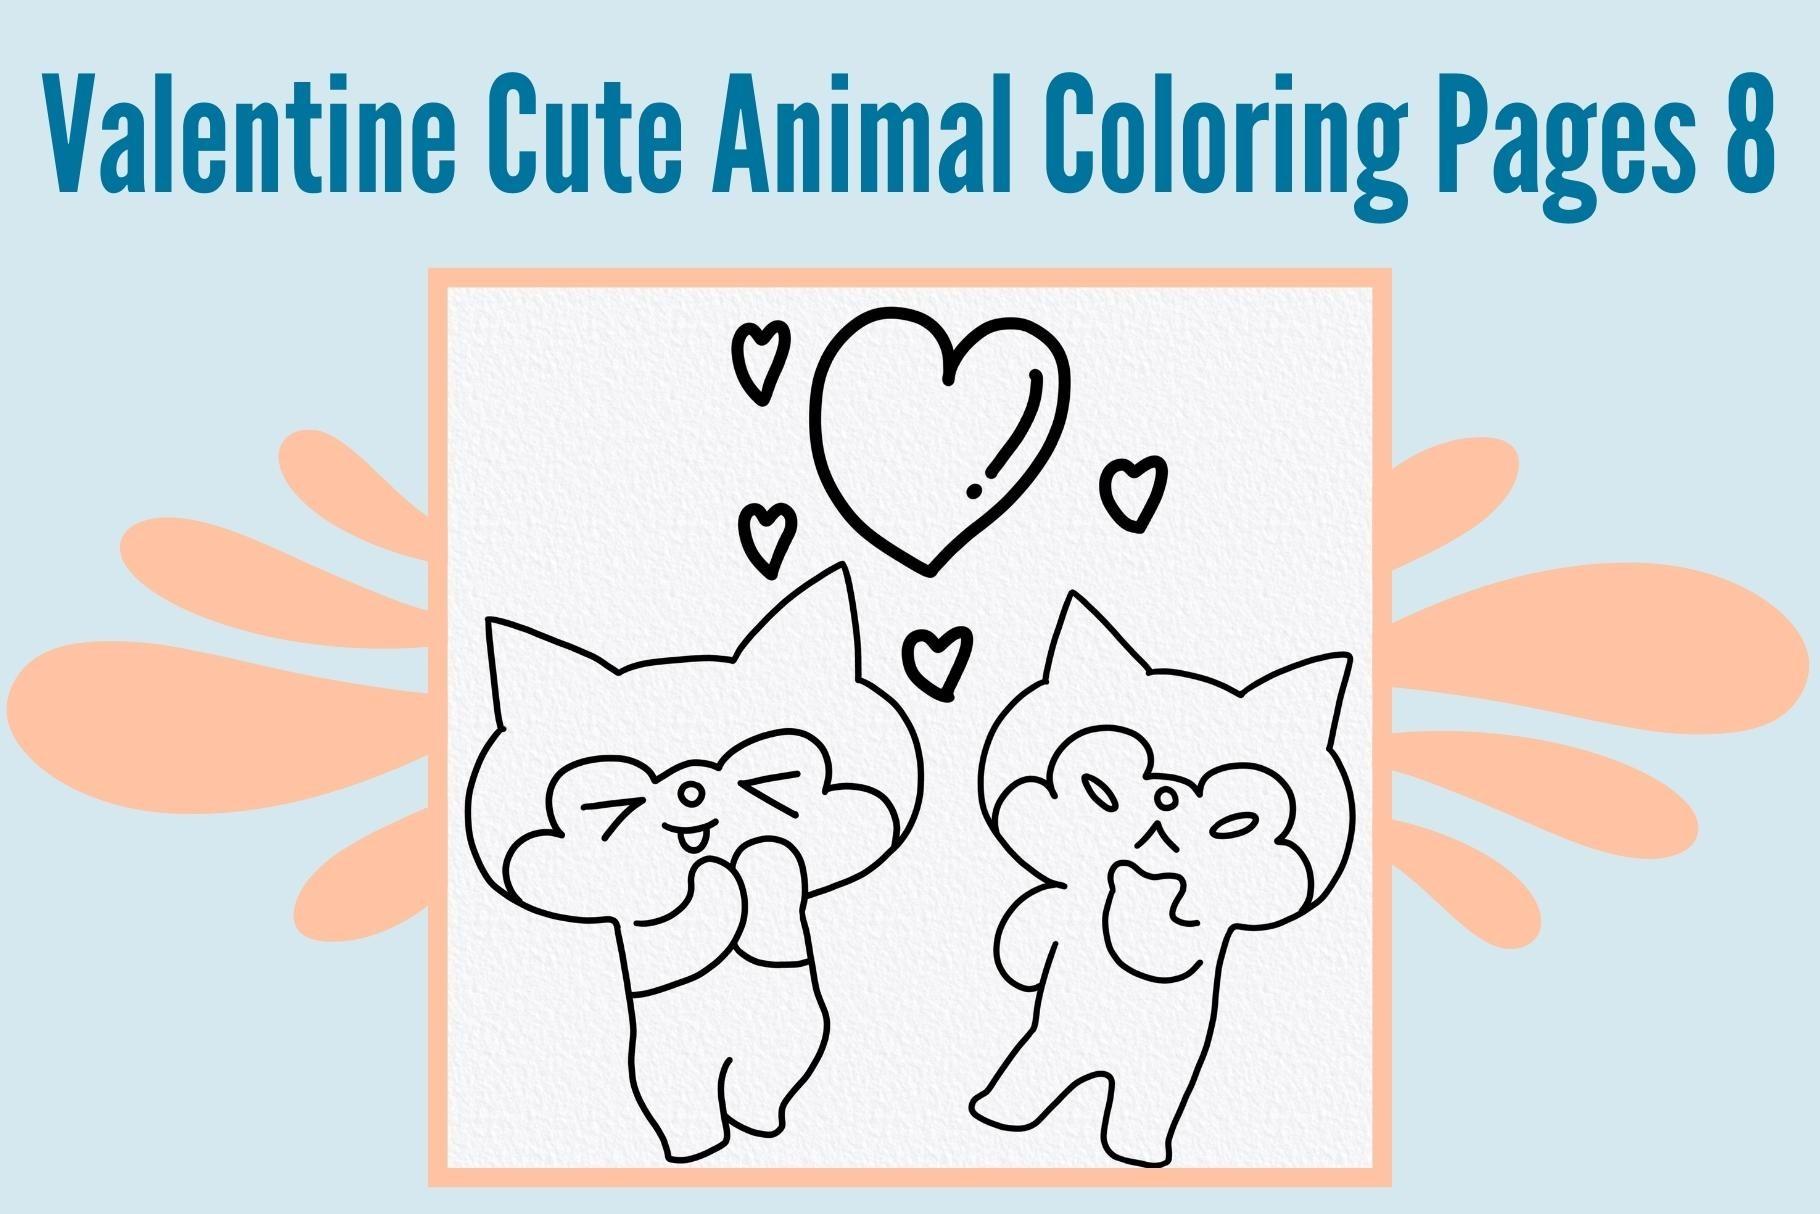 Valentine Cute Animal Coloring Pages 8